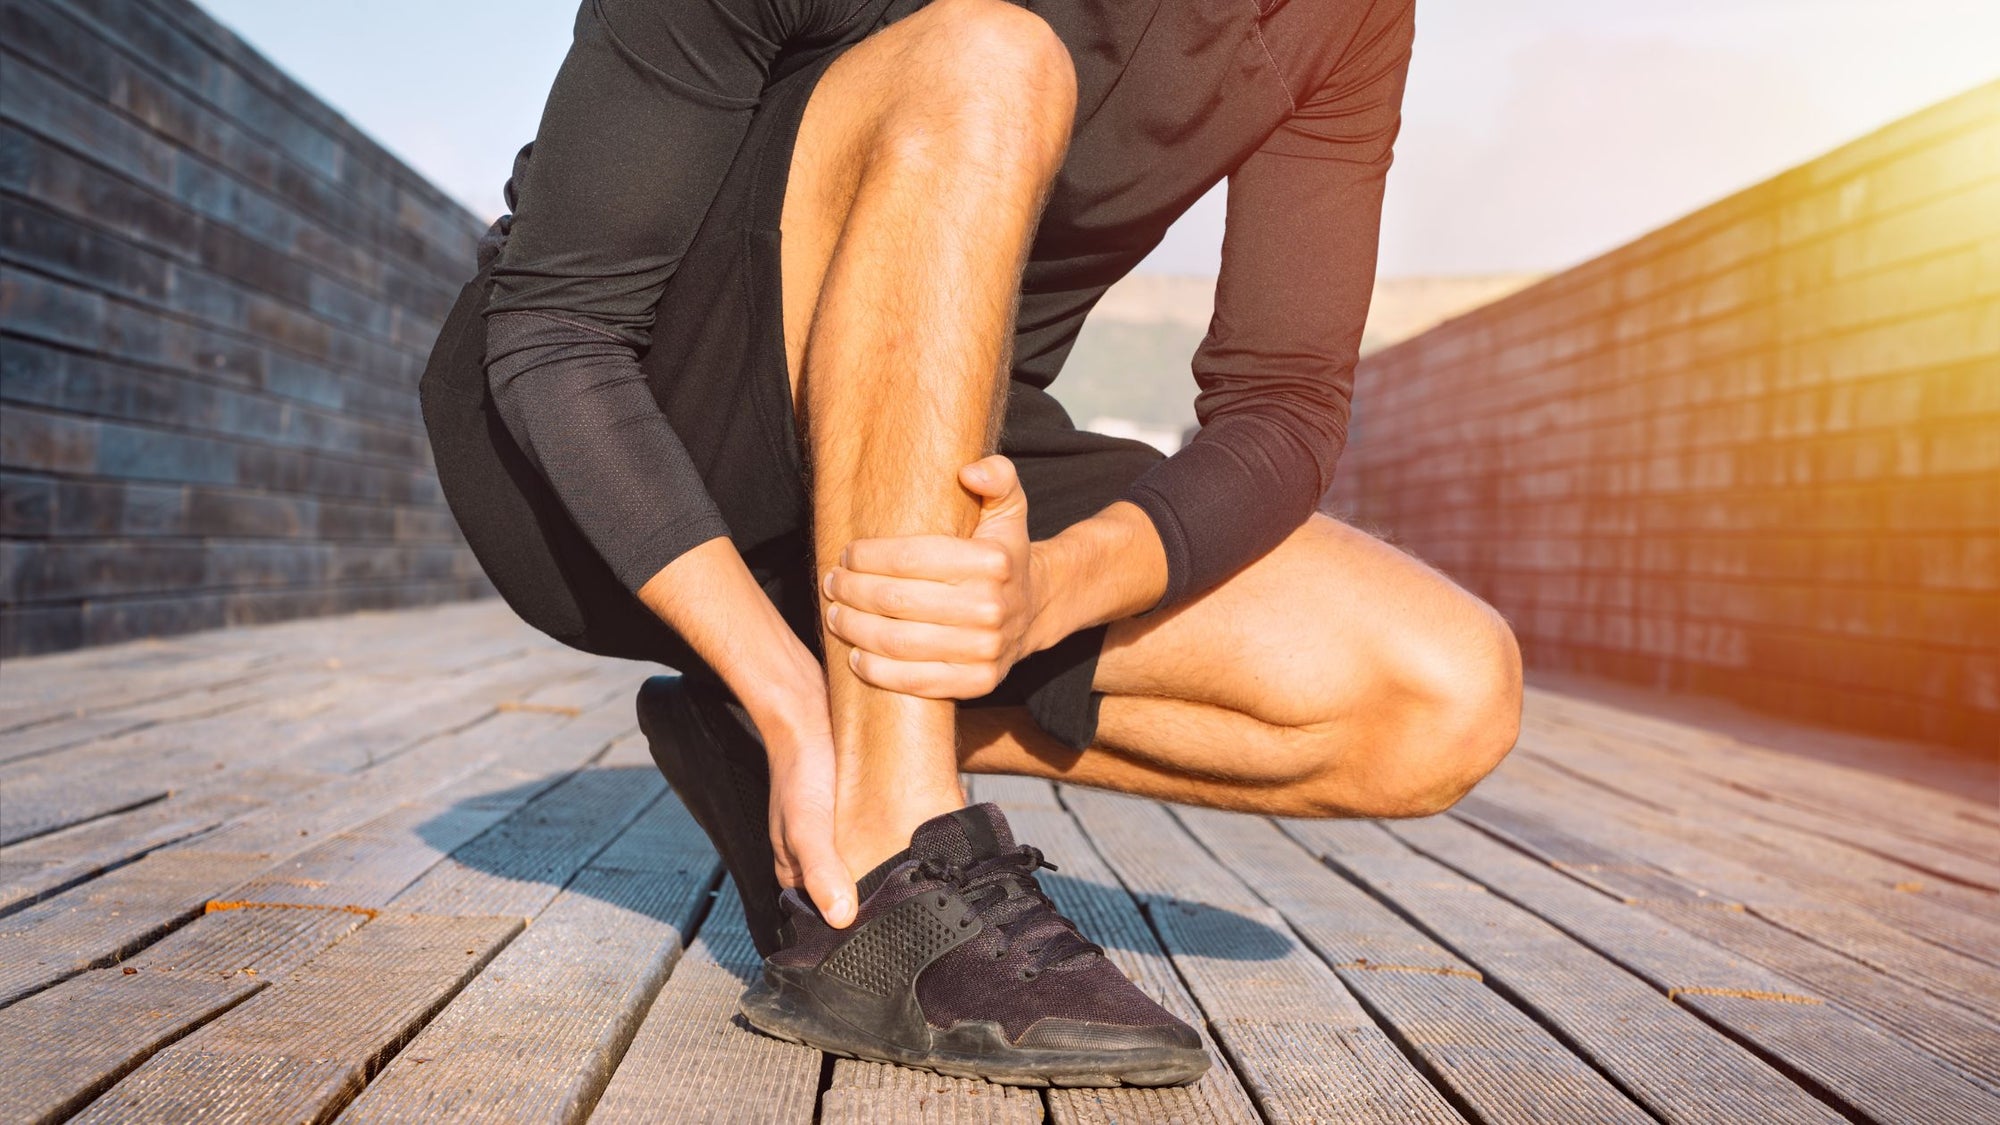 Do running shoes cause or prevent injury?